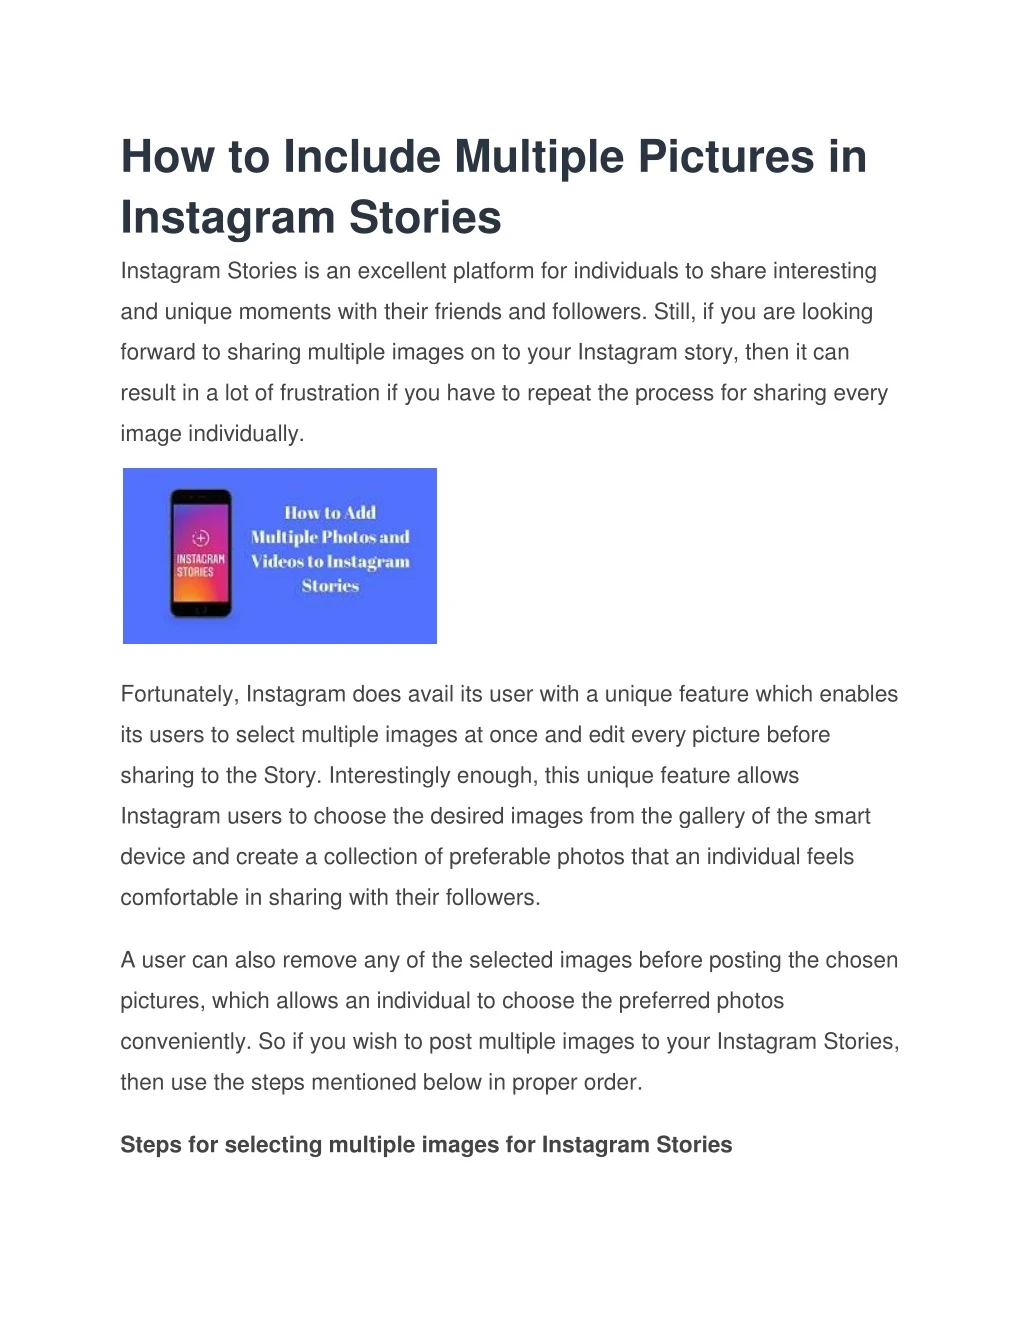 how to include multiple pictures in instagram